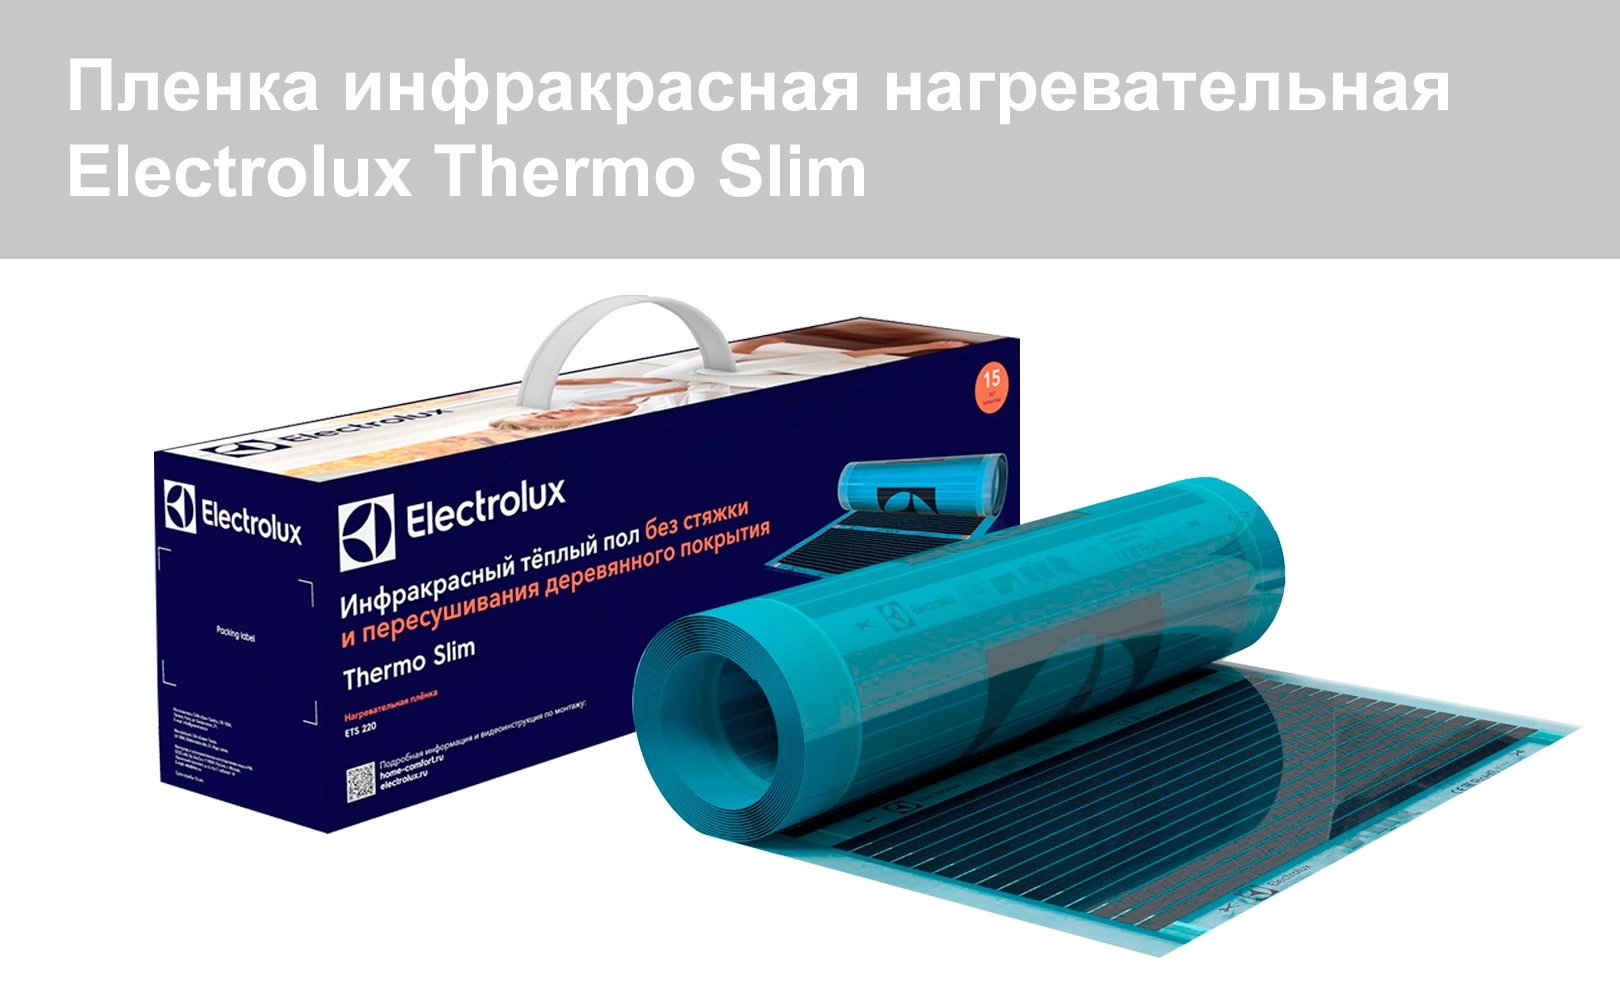 Electrolux Thermo Slim